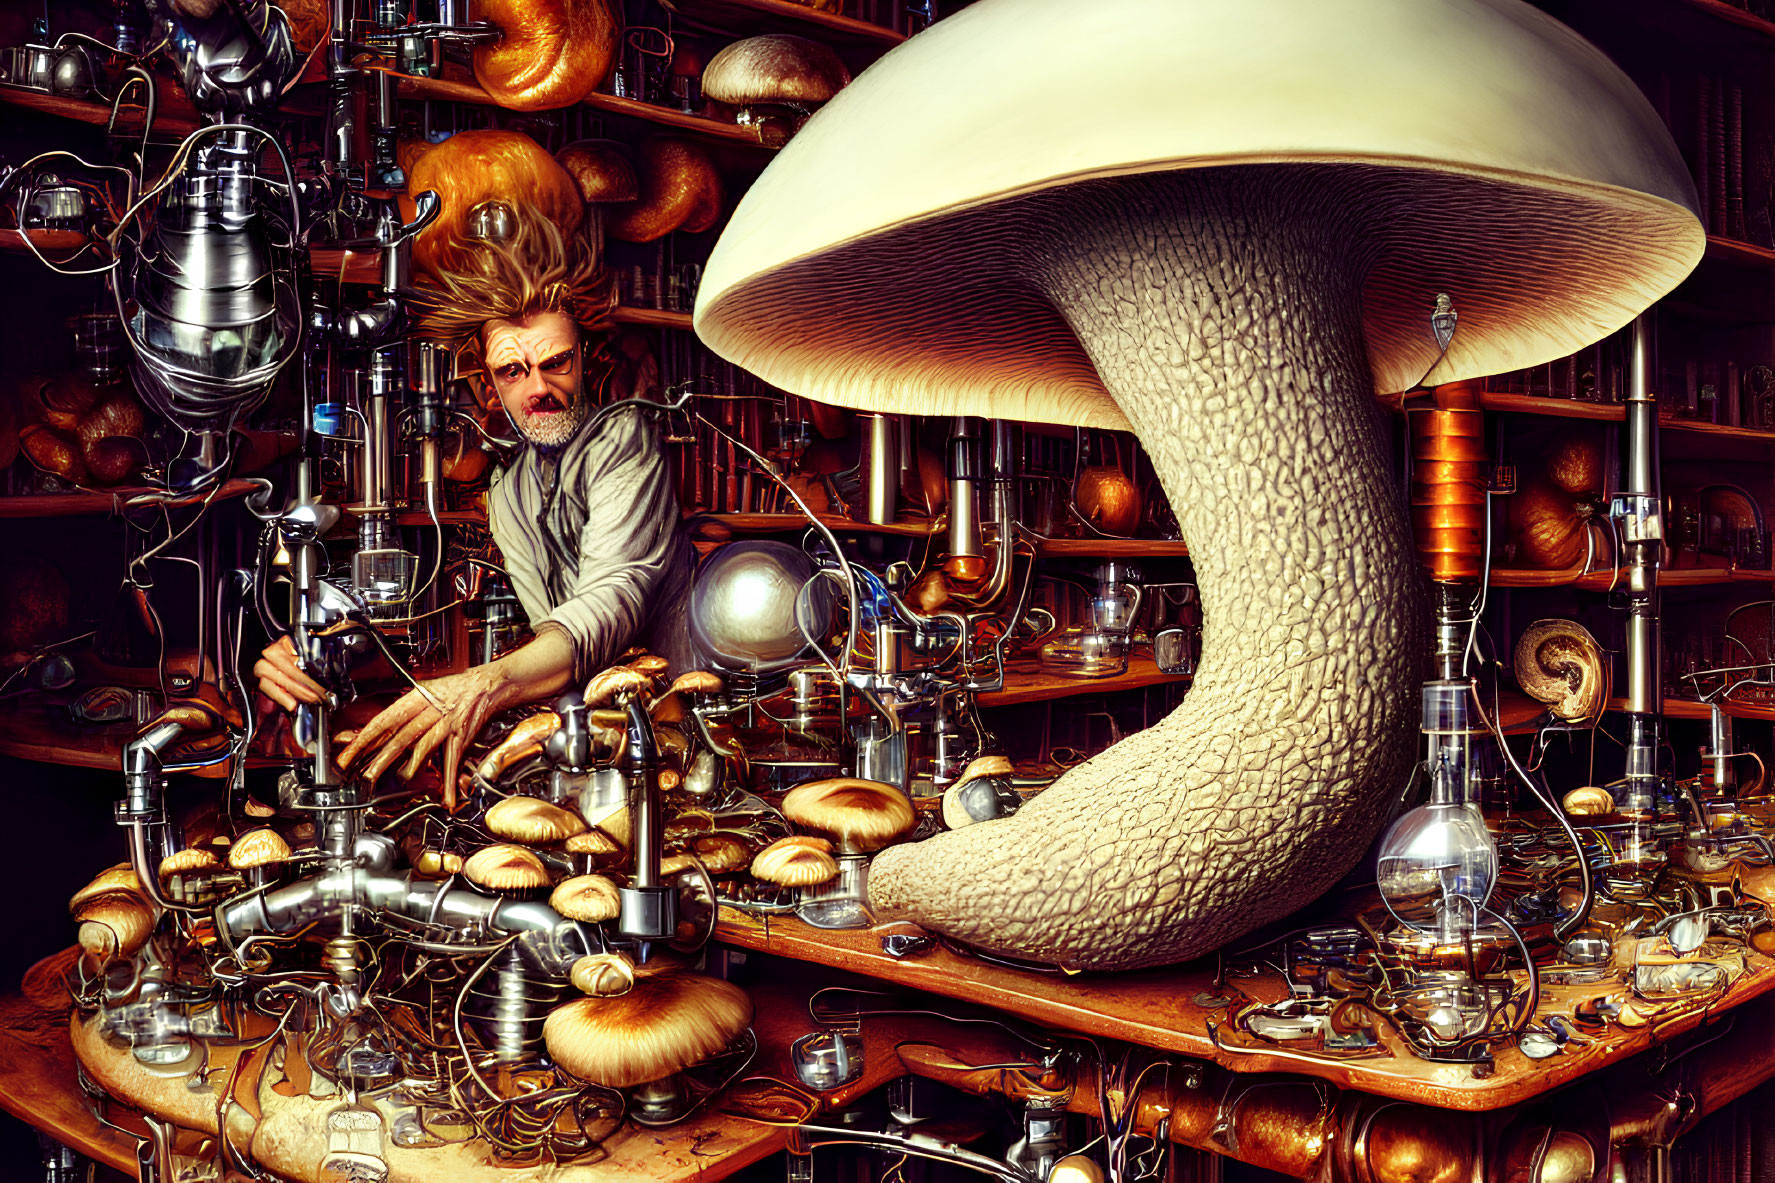 Man with wild hair conducts experiments in cluttered lab with mushrooms and glassware under giant mushroom